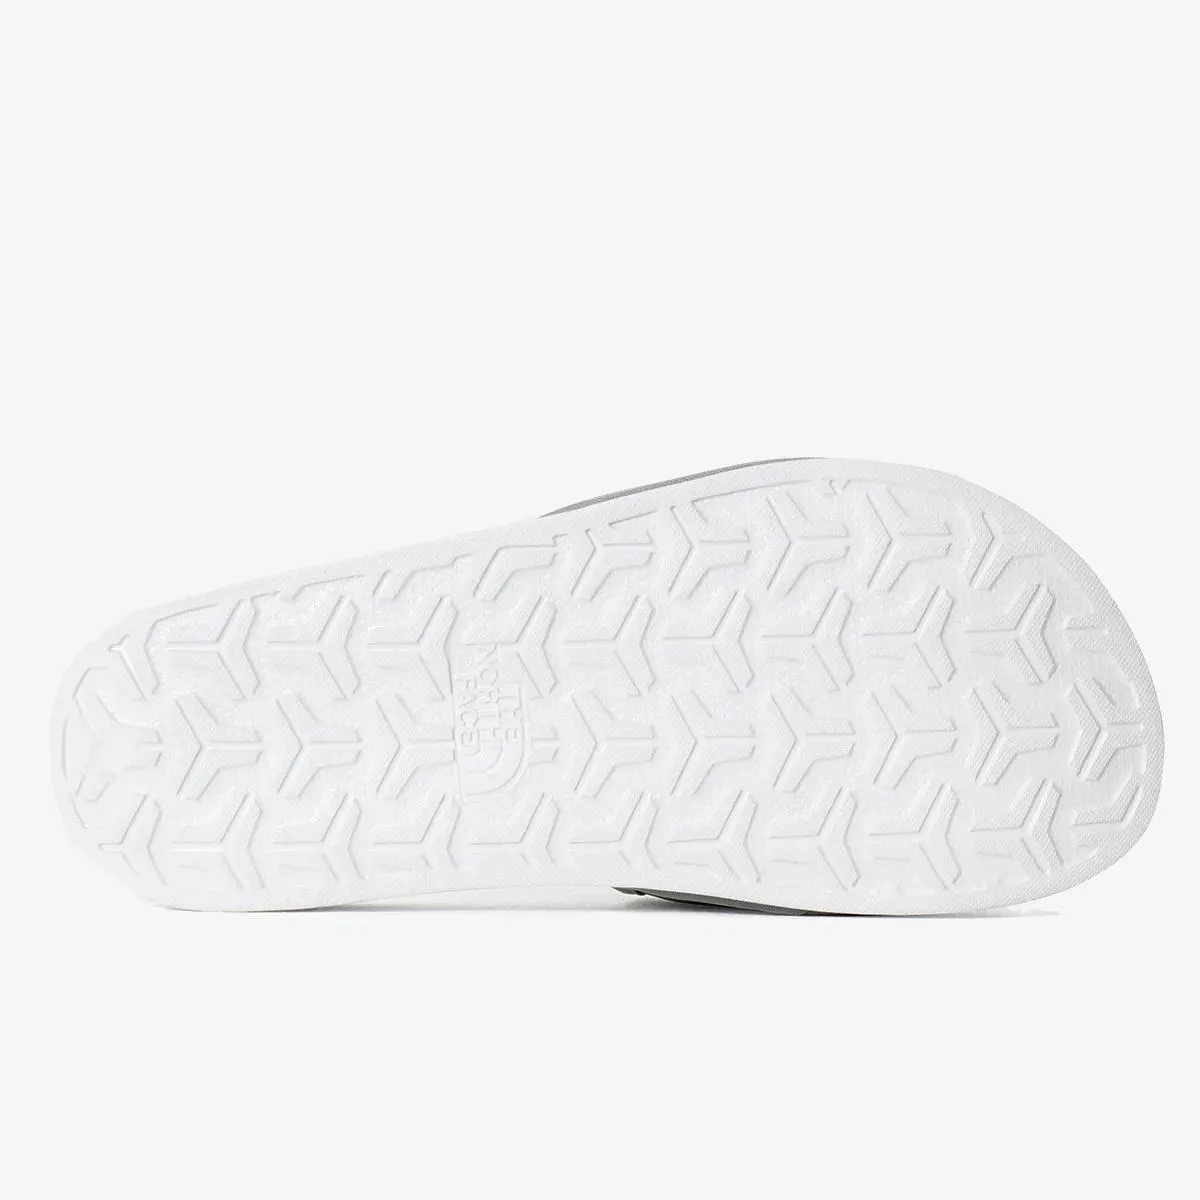 The North Face W BC SLIDE III METAL MTLCSLVR/TNFWHT 